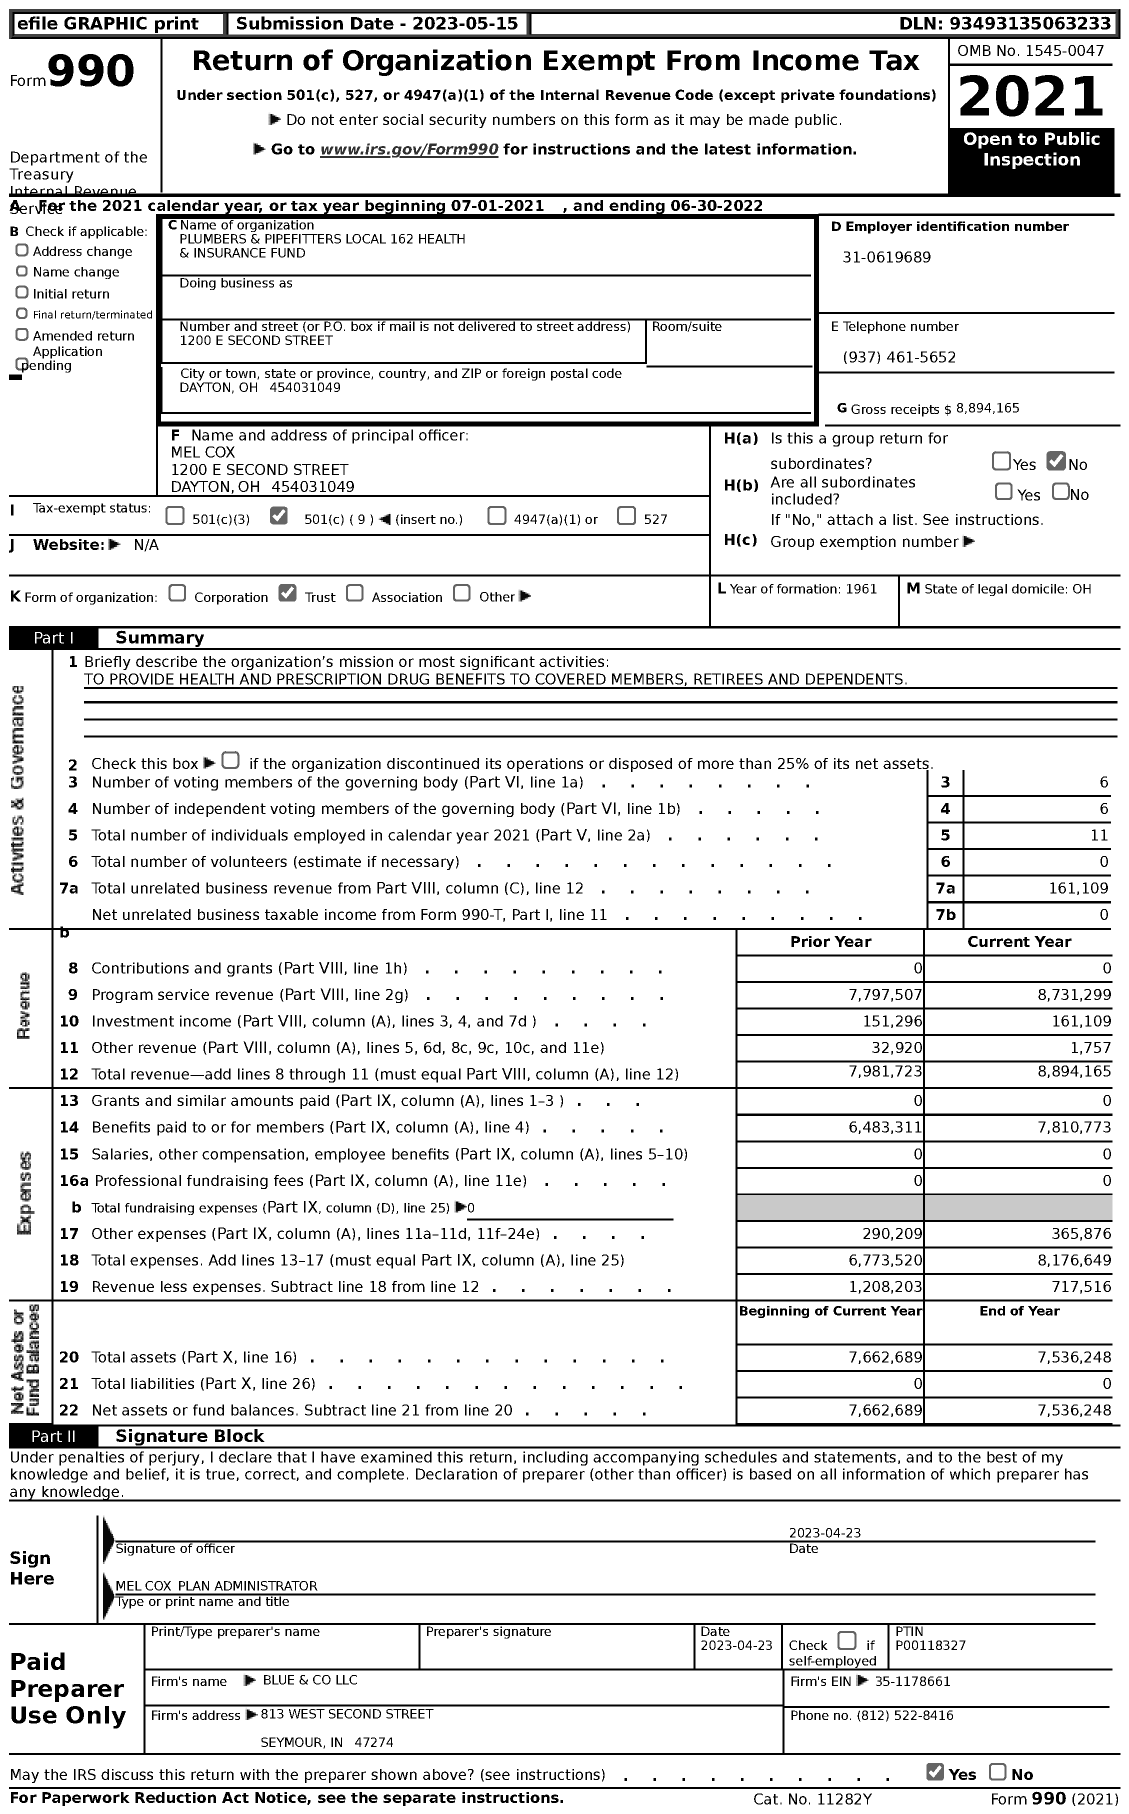 Image of first page of 2021 Form 990 for Plumbers and Pipefitters Local 162 Health and insurance fund